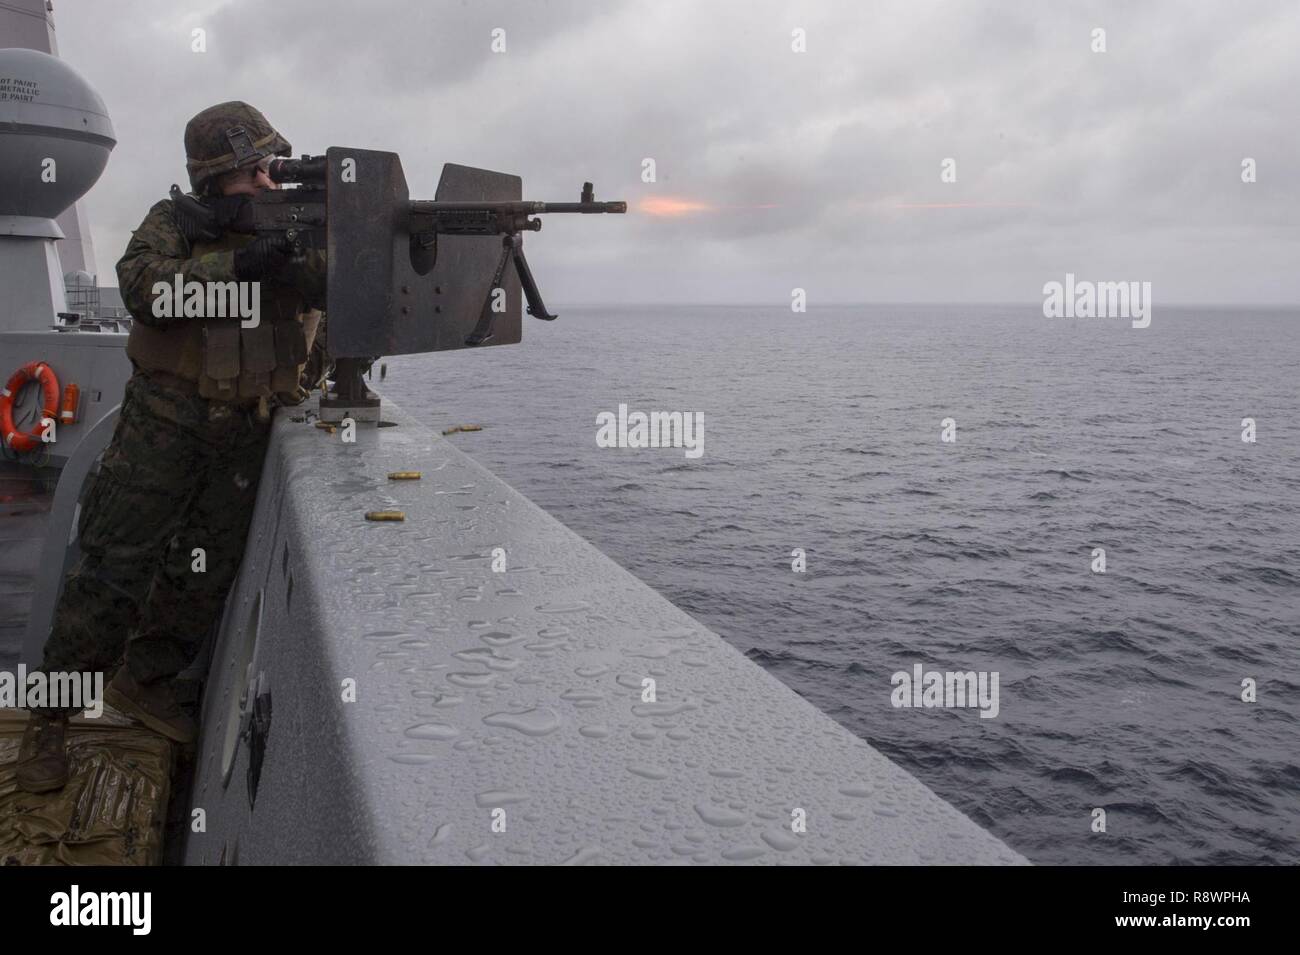 WATERS SOUTH OF JAPAN (March 11, 2017) Lance Cpl. Nathan Colter, assigned to the Battalion Landing Team, 2nd Battalion, 5th Marines, fires an M240B machine gun on the bridge wing of the amphibious transport dock ship USS Green Bay (LPD 20) during a defense of the amphibious task force exercise. Green Bay, part of the Bonhomme Richard Expeditionary Strike Group, with embarked 31st Marine Expeditionary Unit, is on a routine patrol, operating in the Indo-Asia-Pacific region to enhance warfighting readiness and posture forward as a ready-response force for any type of contingency. Stock Photo